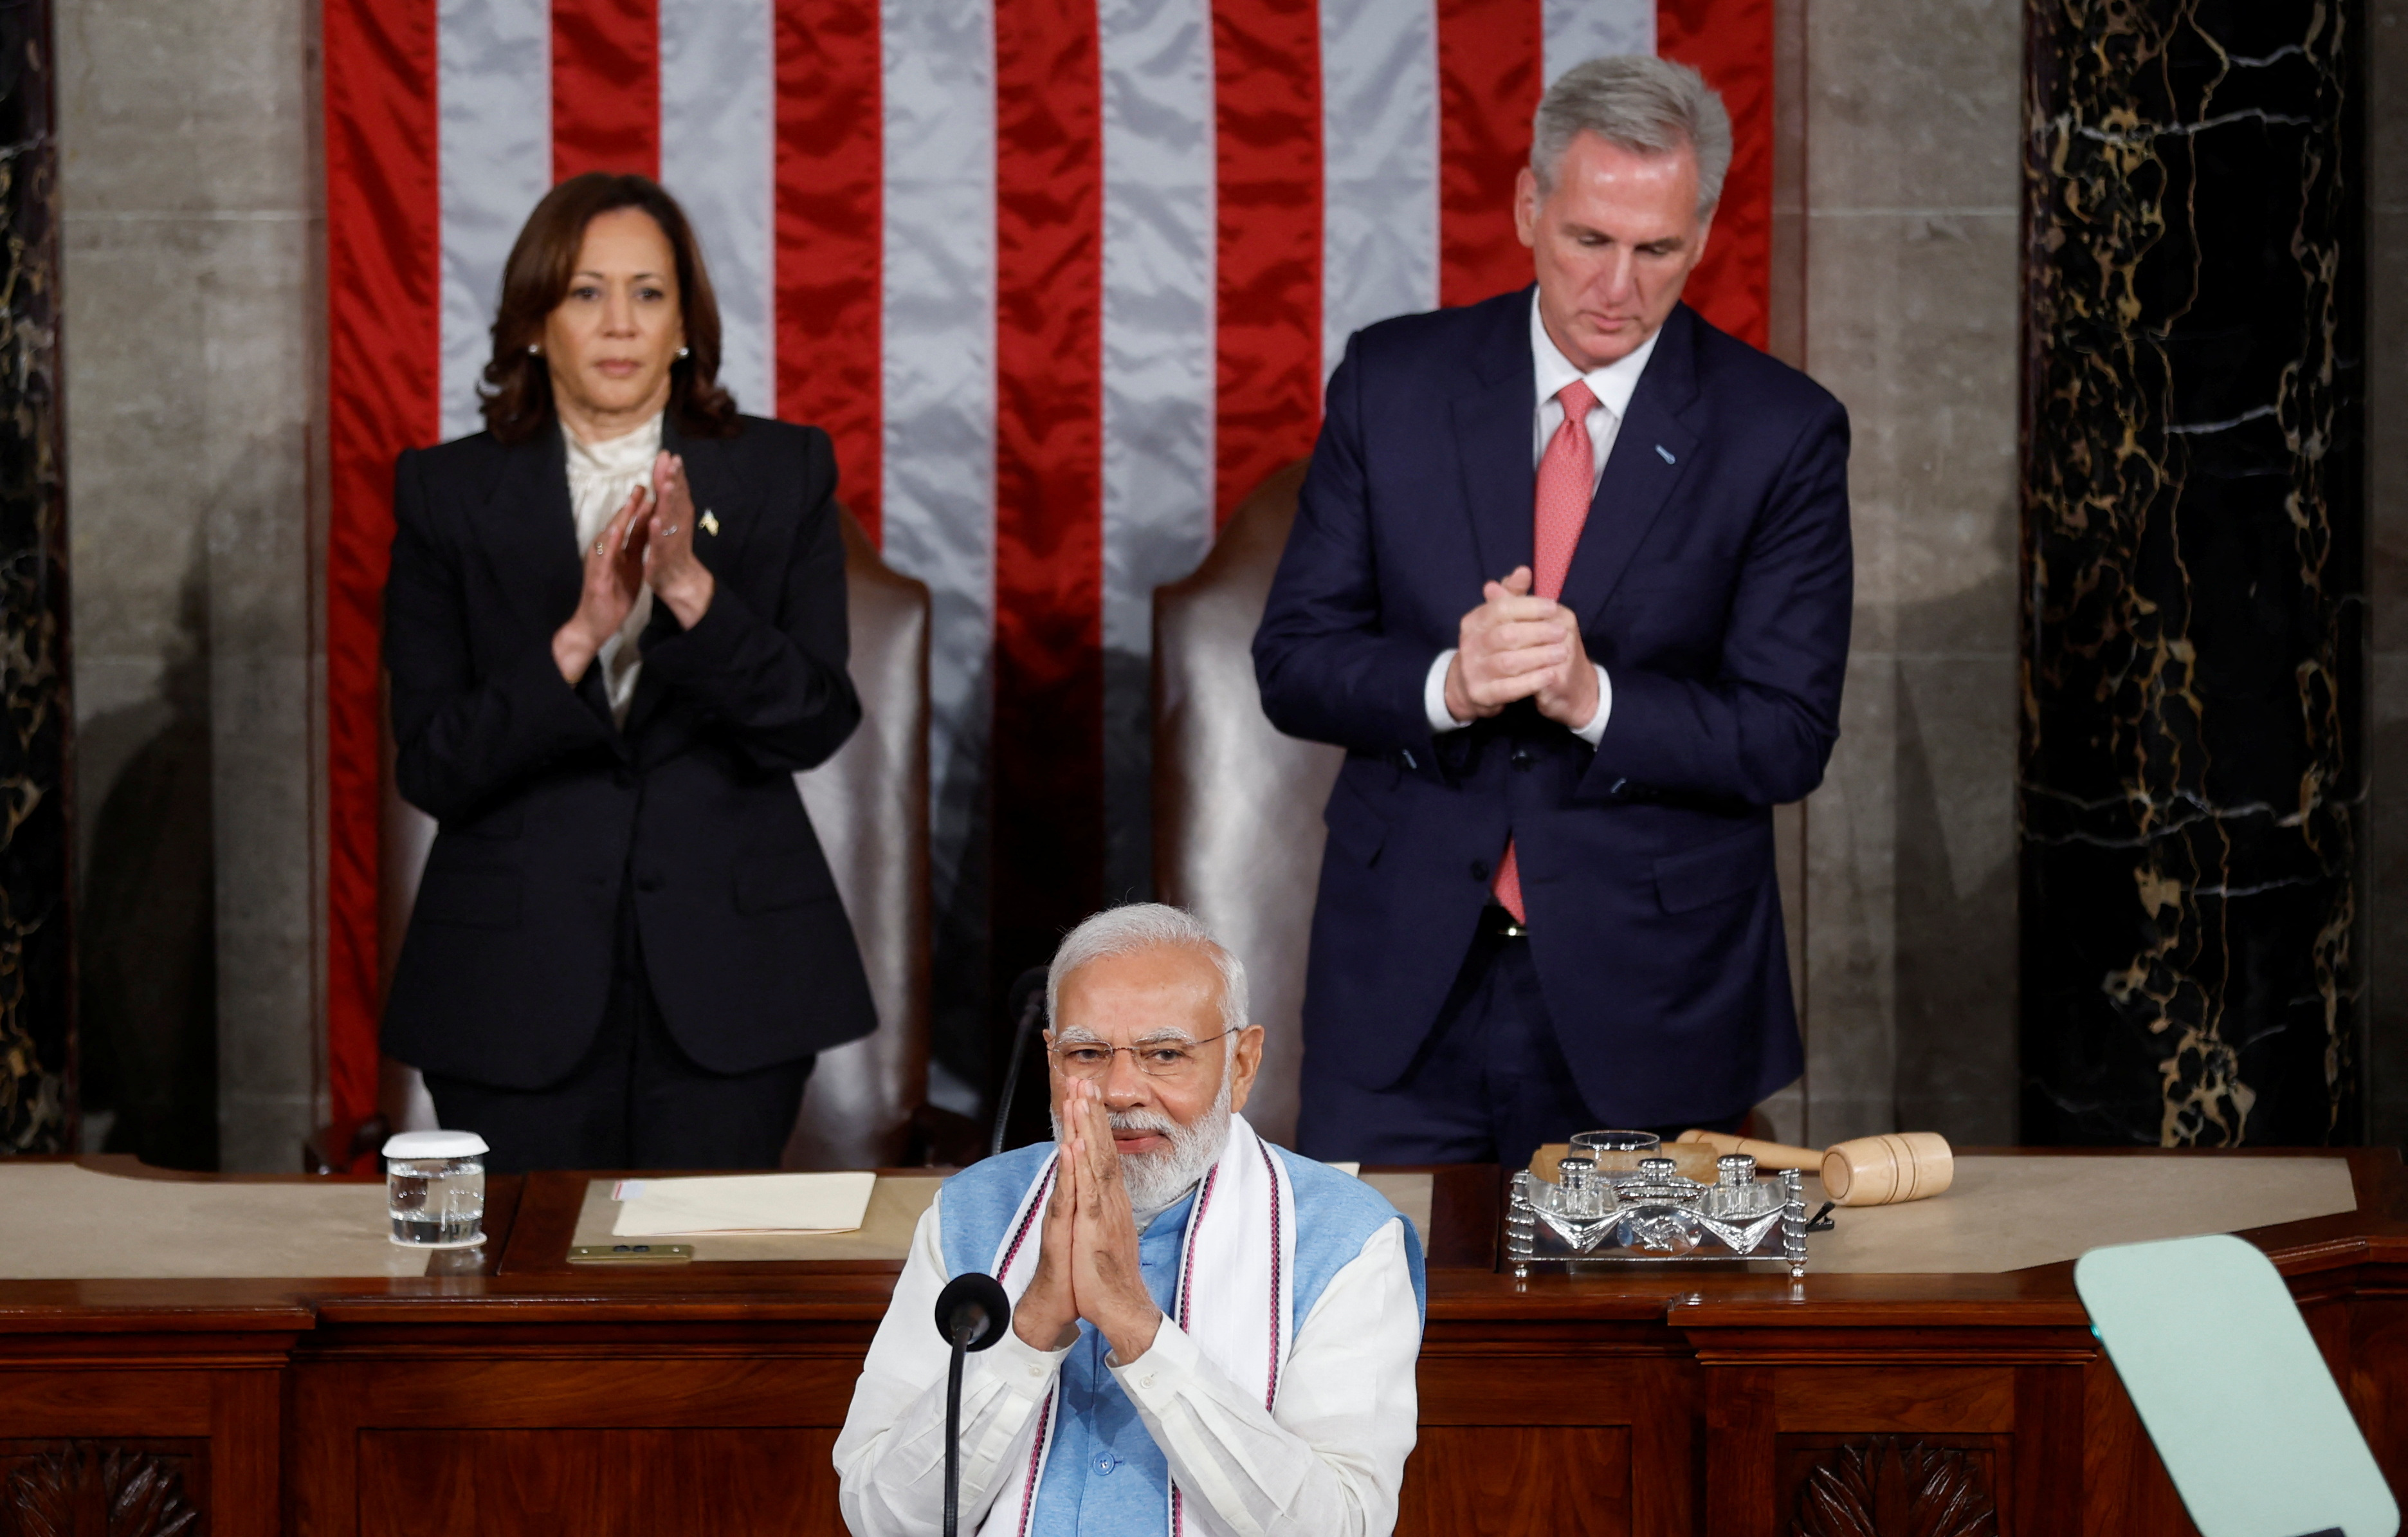 India�s Prime Minister Narendra Modi addresses a joint meeting of Congress in Washington